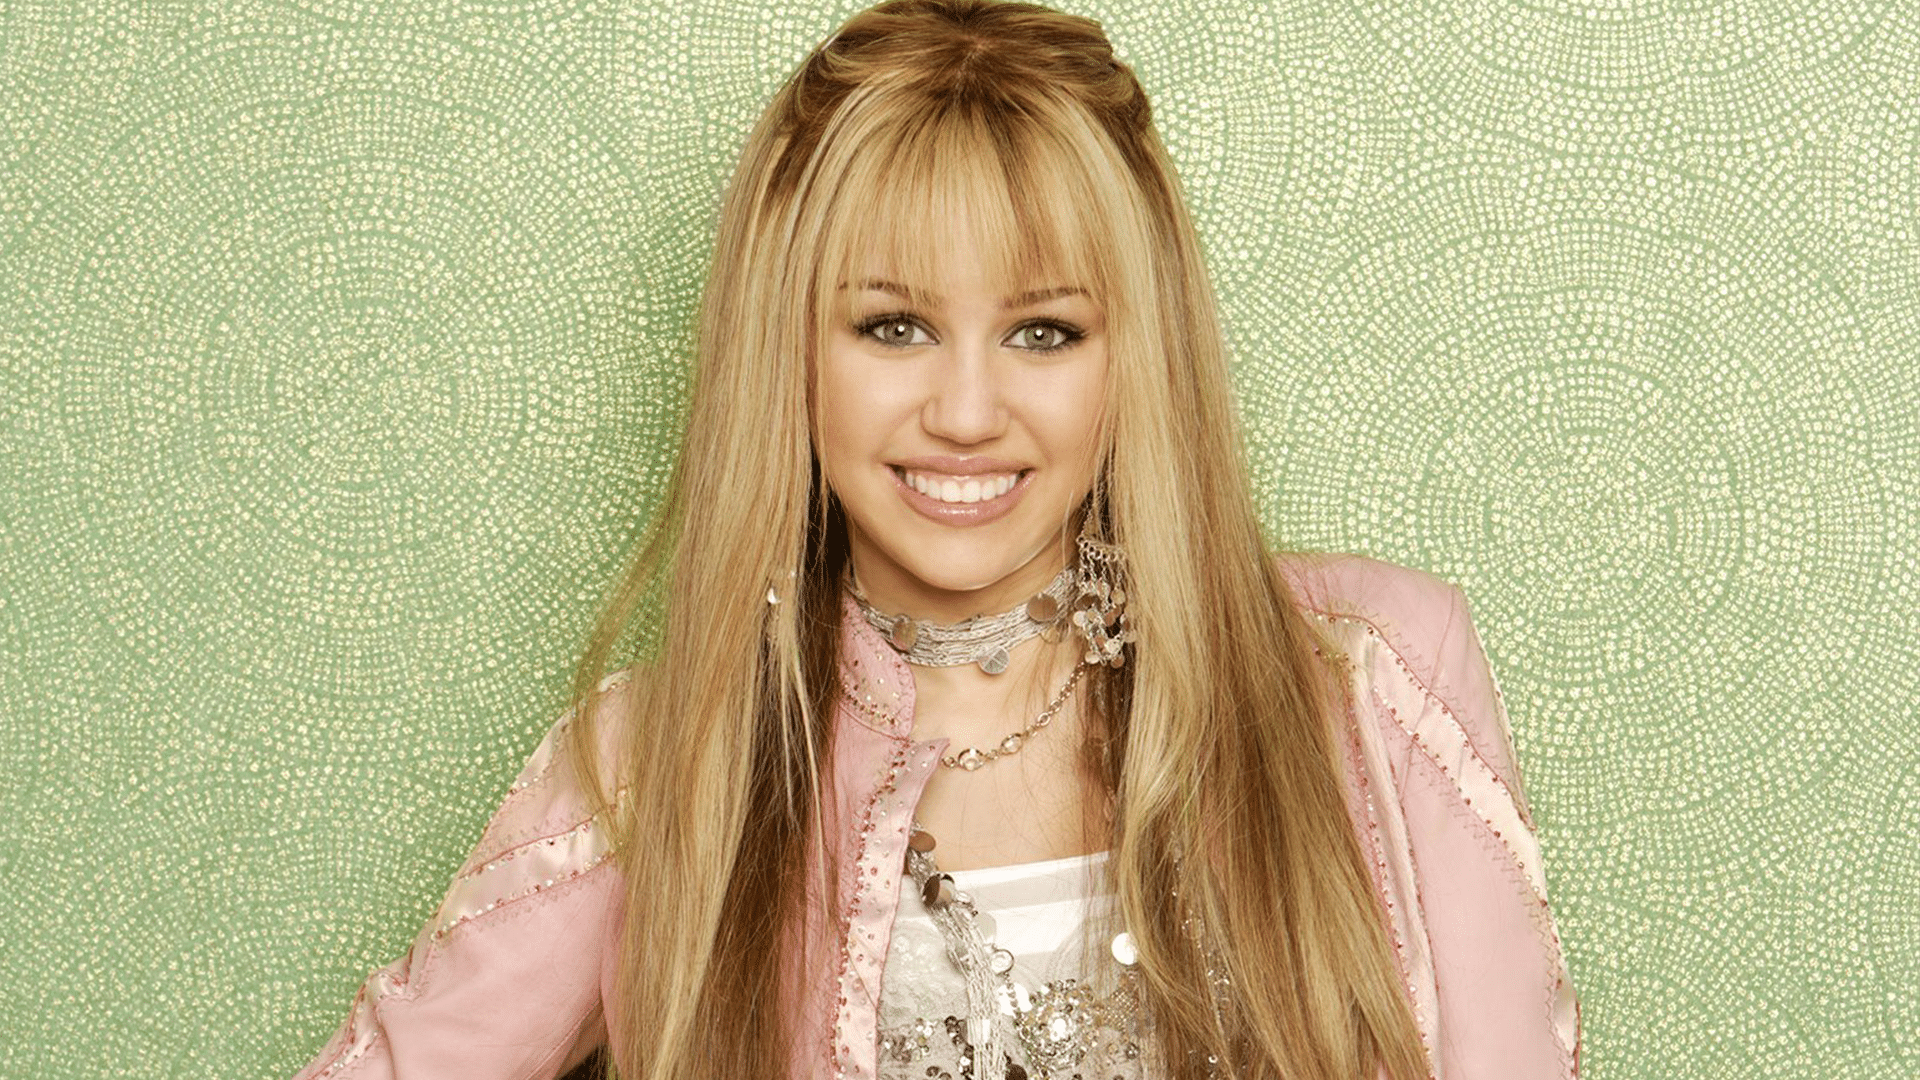 Hannah Montana's 15 Year Anniversary Has Fans Thirsty For A Reboot